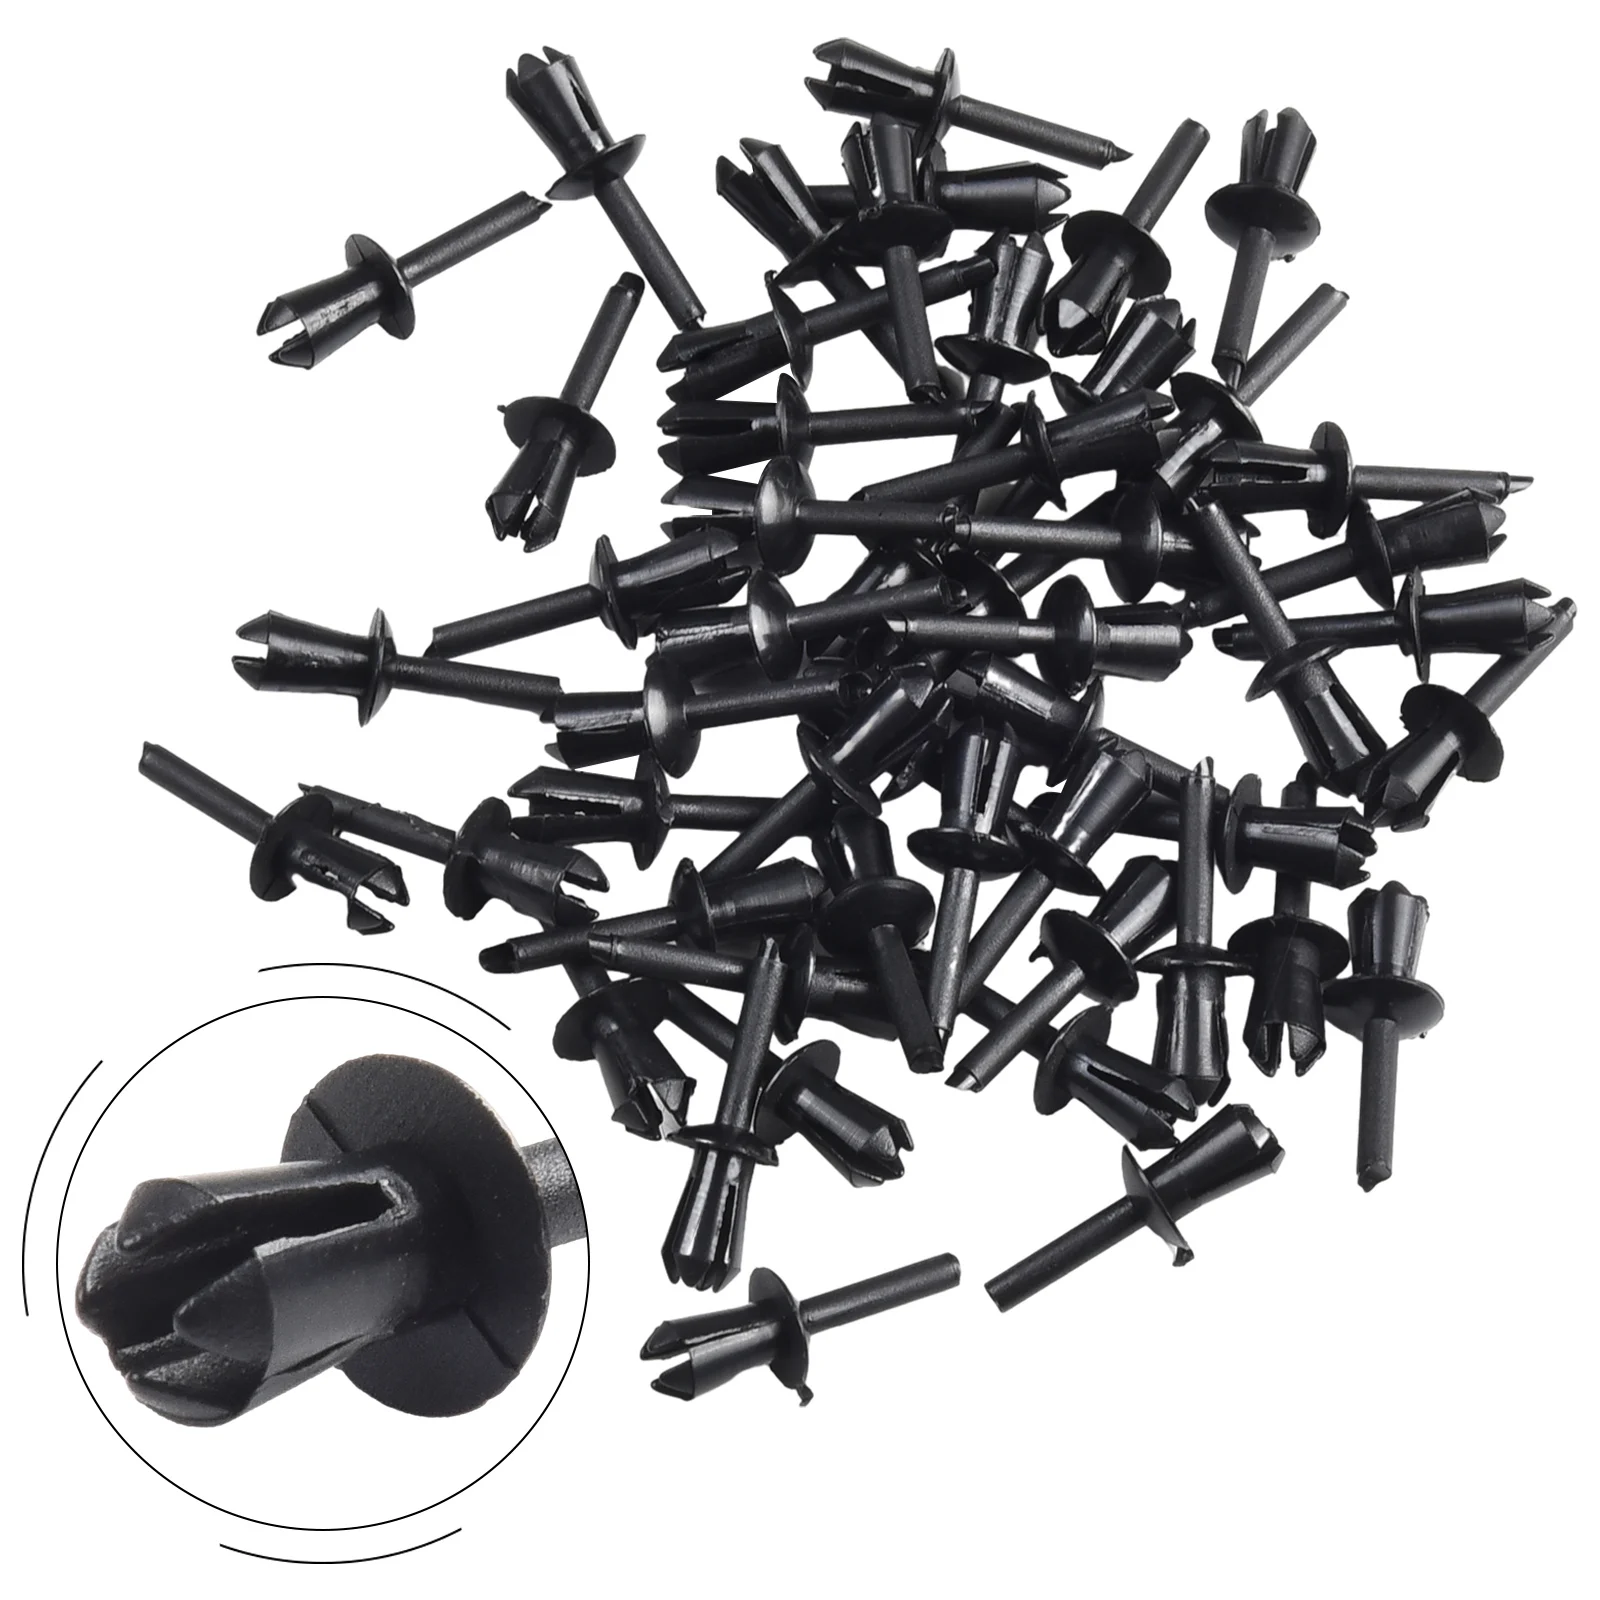 

50-Piece Set of Unbranded Black Plastic Clips/Rivets/Fasteners - Fits 5mm Diameter Hole, Perfect for Car Door Trim, Panel Hood,